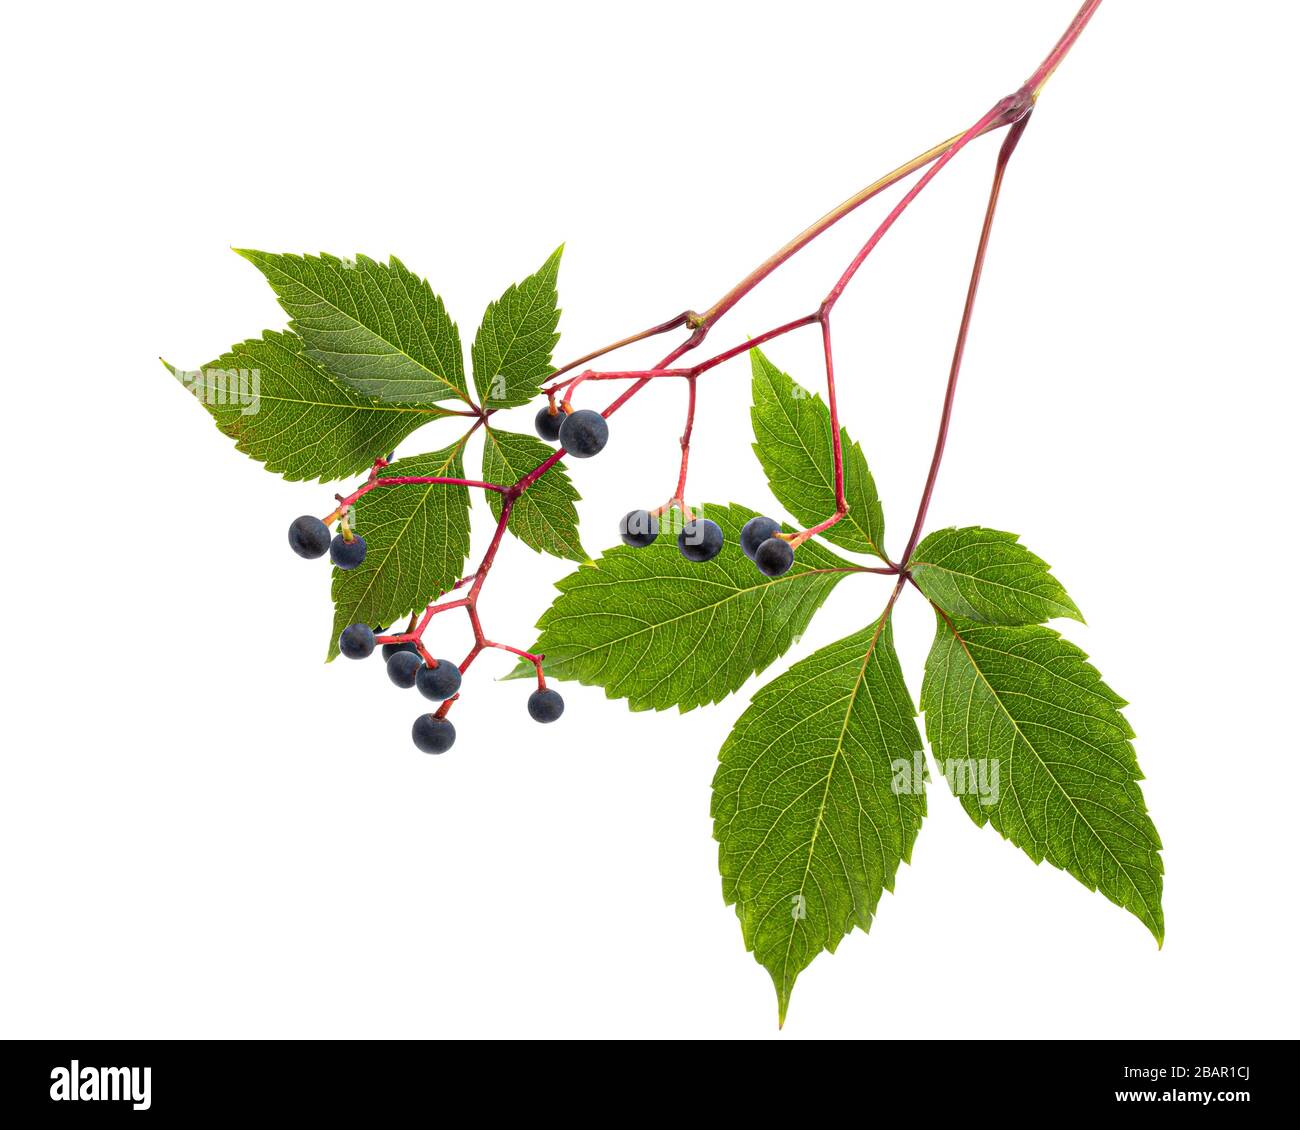 Natural green foliage and berries of girlish grapes (lat. Parthenocissus quinquefolia), isolated on white background Stock Photo